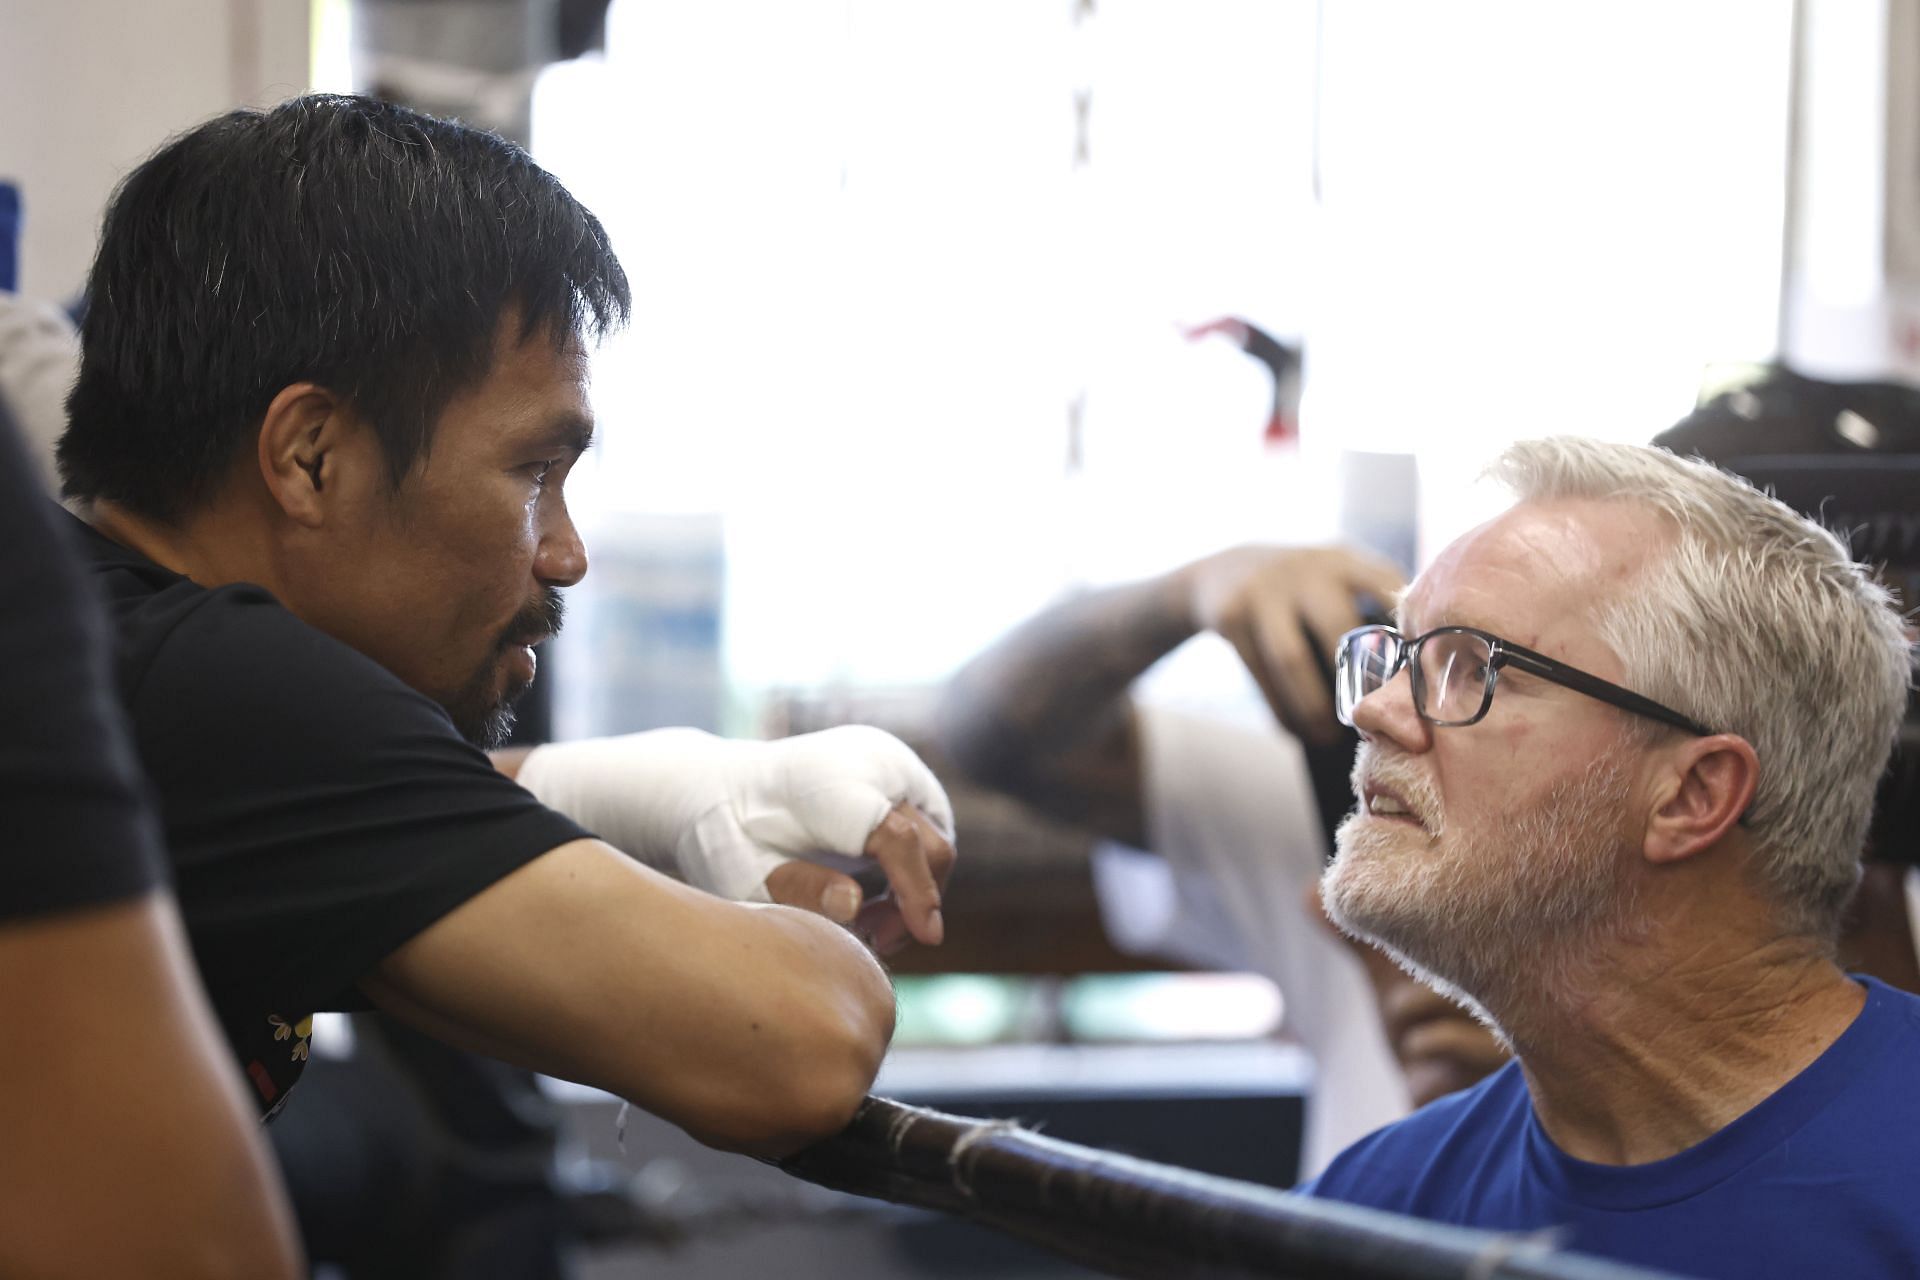 Manny Pacquiao (L) trained with legendary boxing trainer Freddie Roach (R) until his retirement